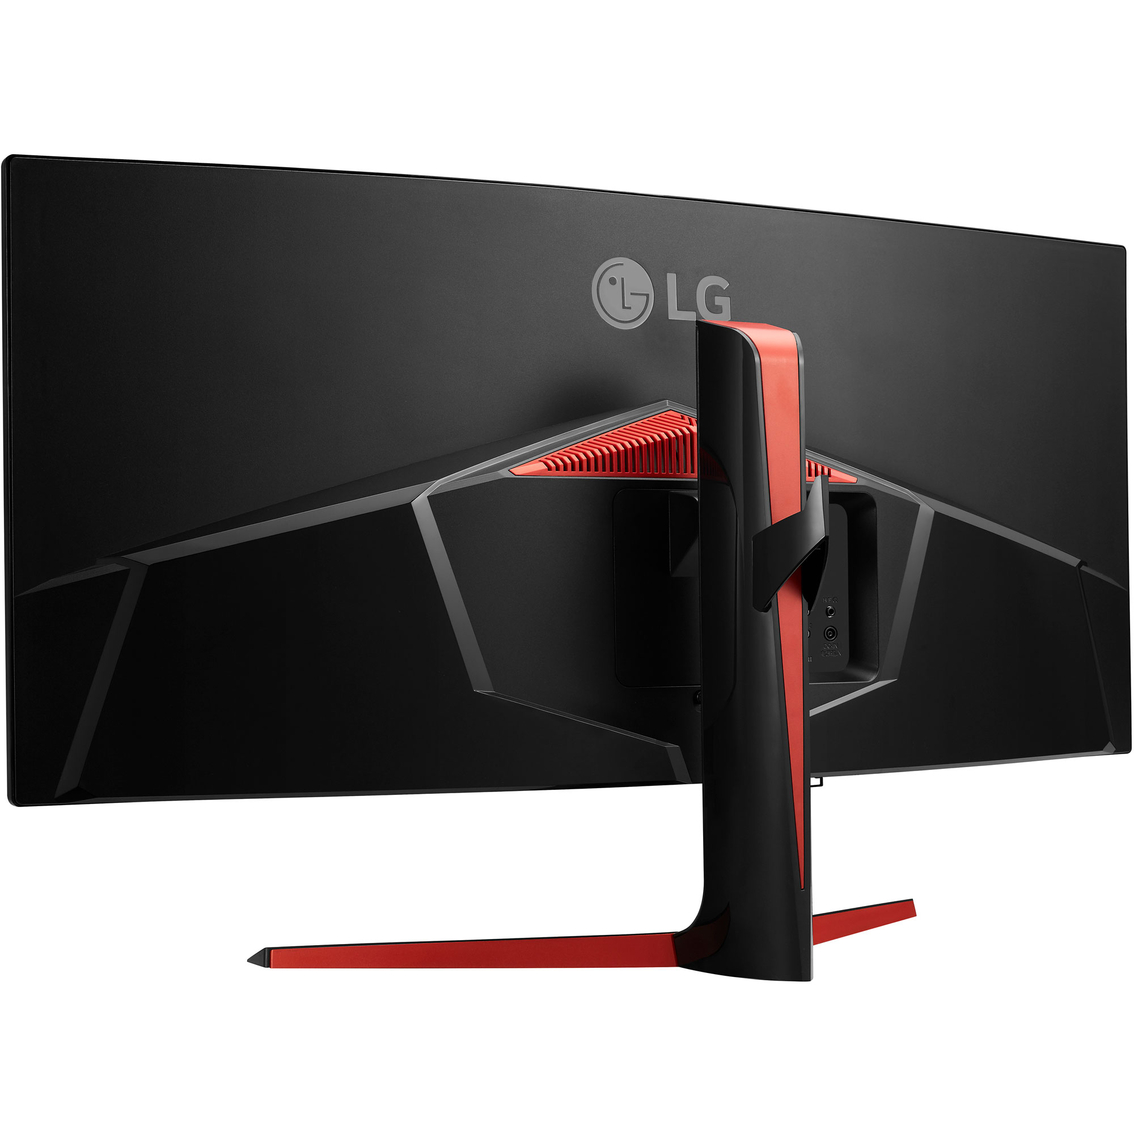 LG 34 in. 144Hz Curved WFHD IPS UltraWide Gaming Monitor 34GL750-B - Image 6 of 10